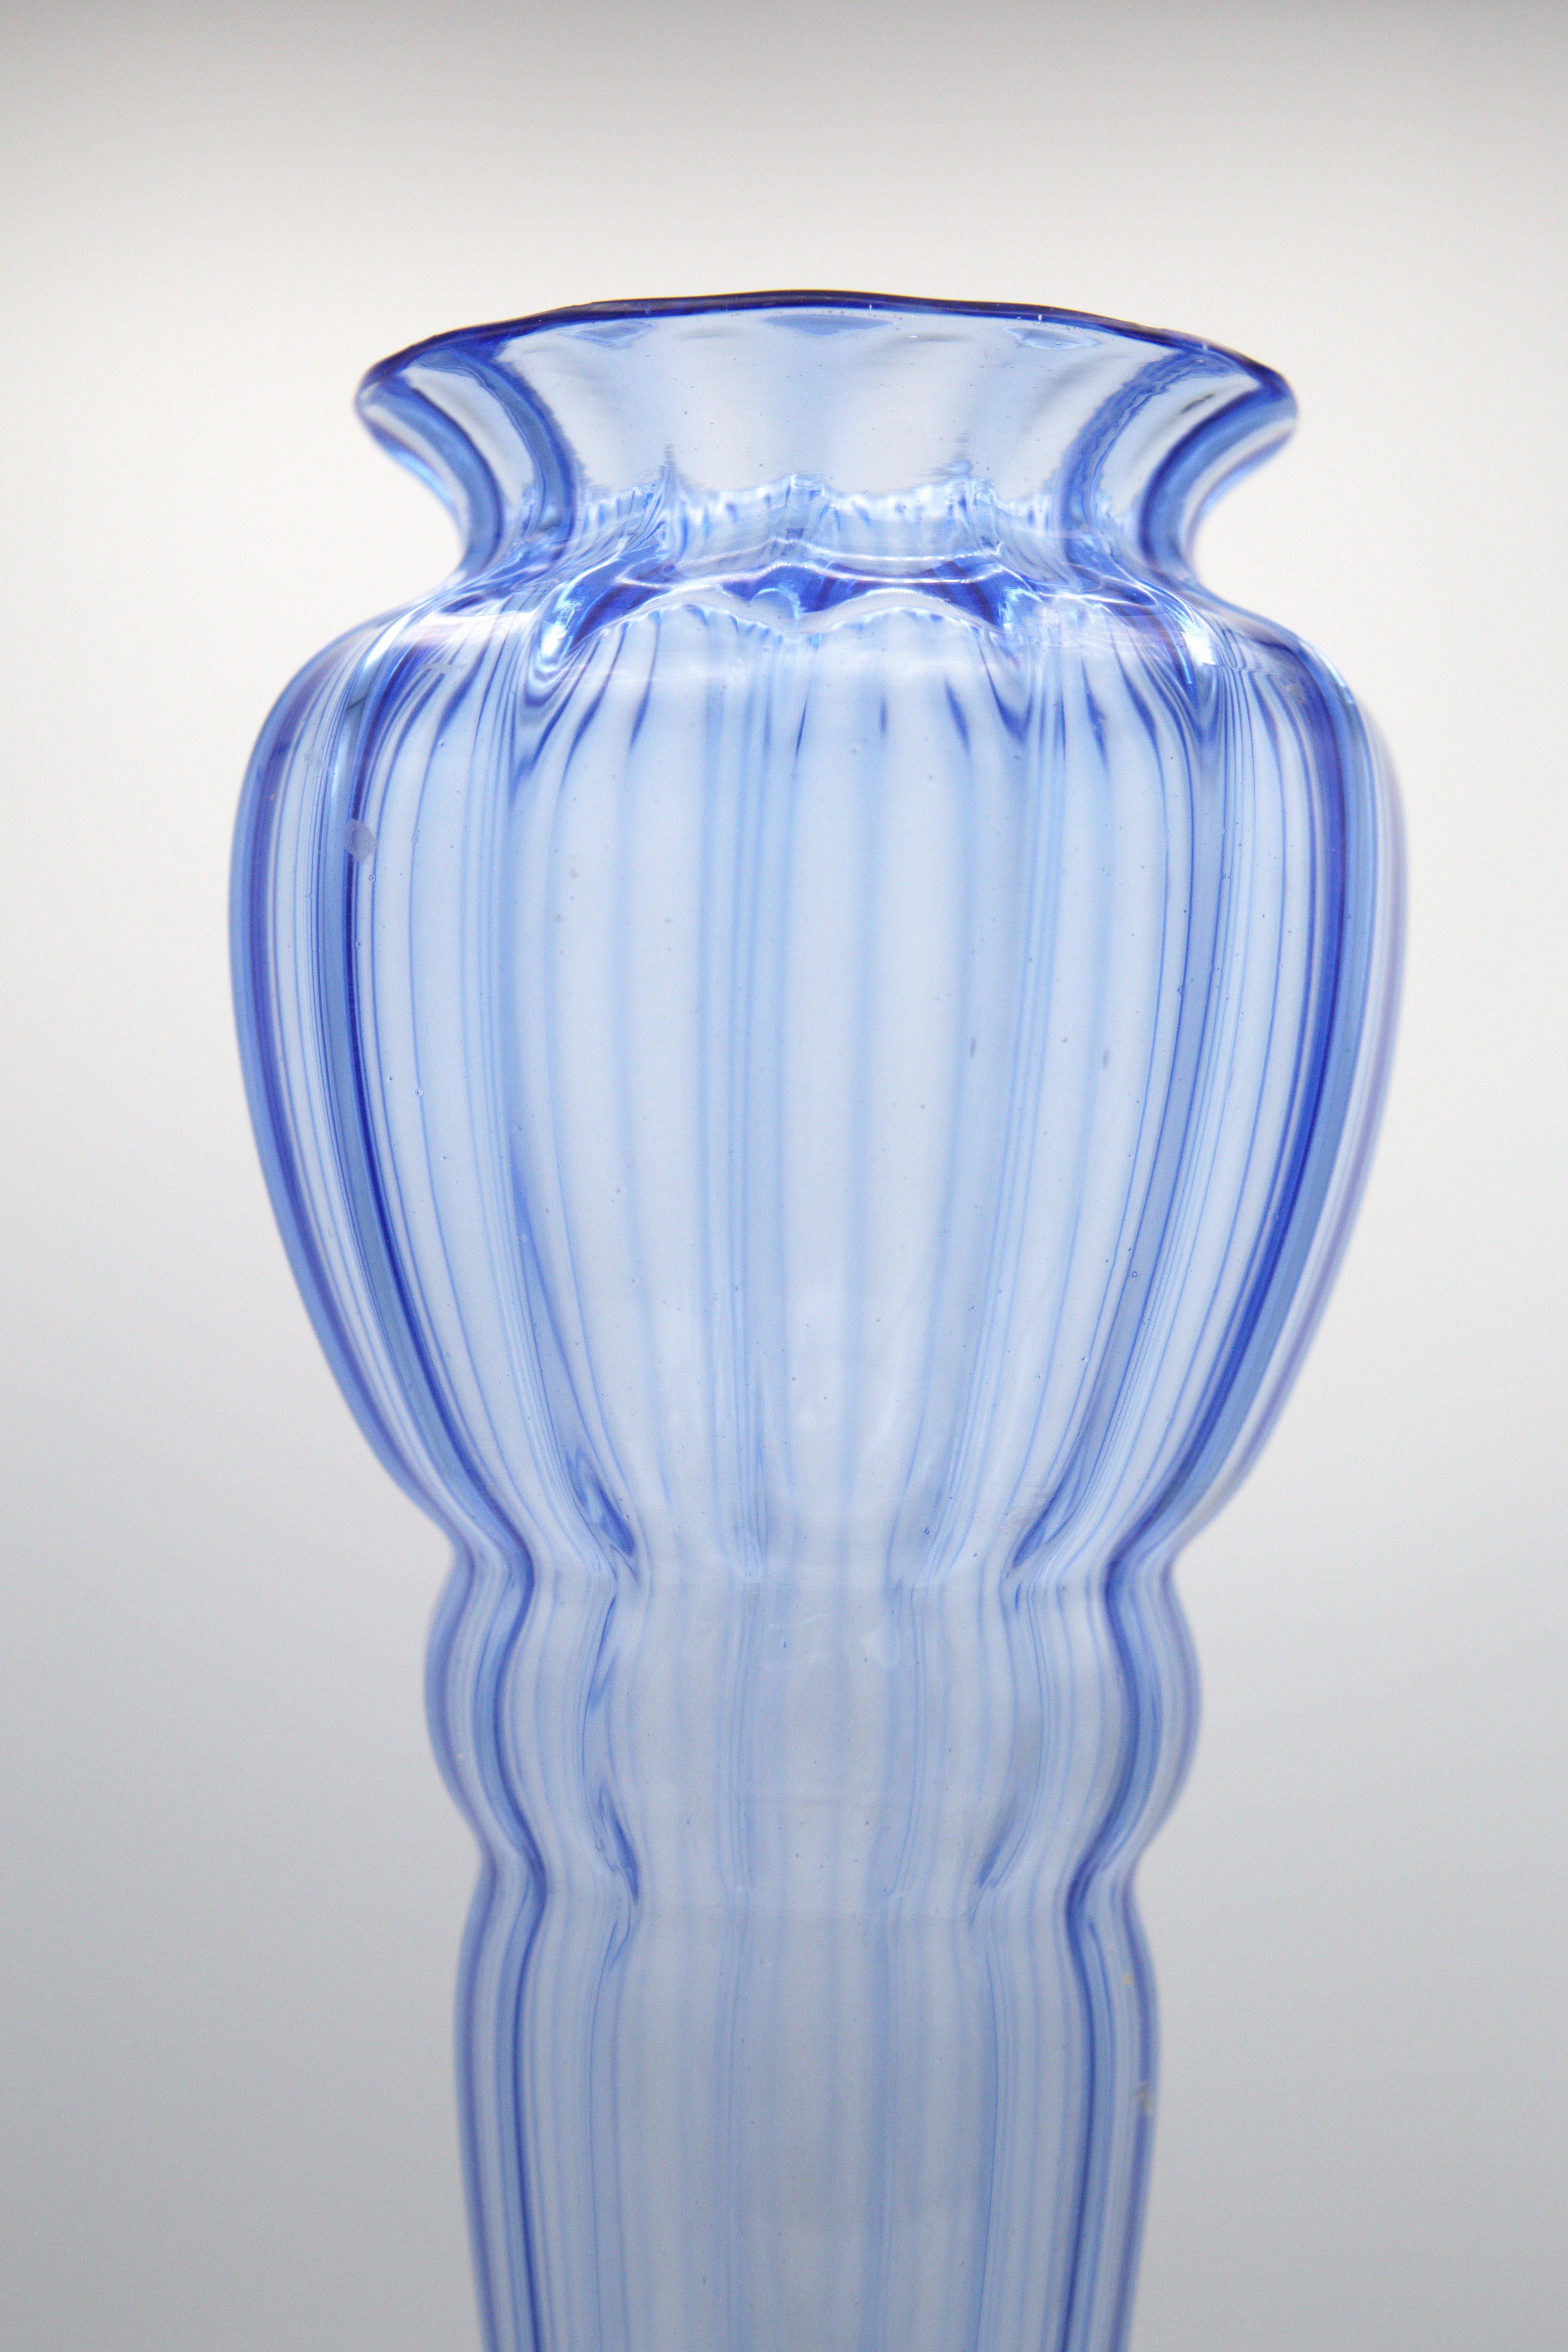 Splendid glass vase designed by Napoleone Martinuzzi for Vittorio Zecchin in the 30's, of fine Italian manufacture.
The vase is made entirely of blue glass, very elegant and fine.
The vase develops in height from a round base, where it is narrower